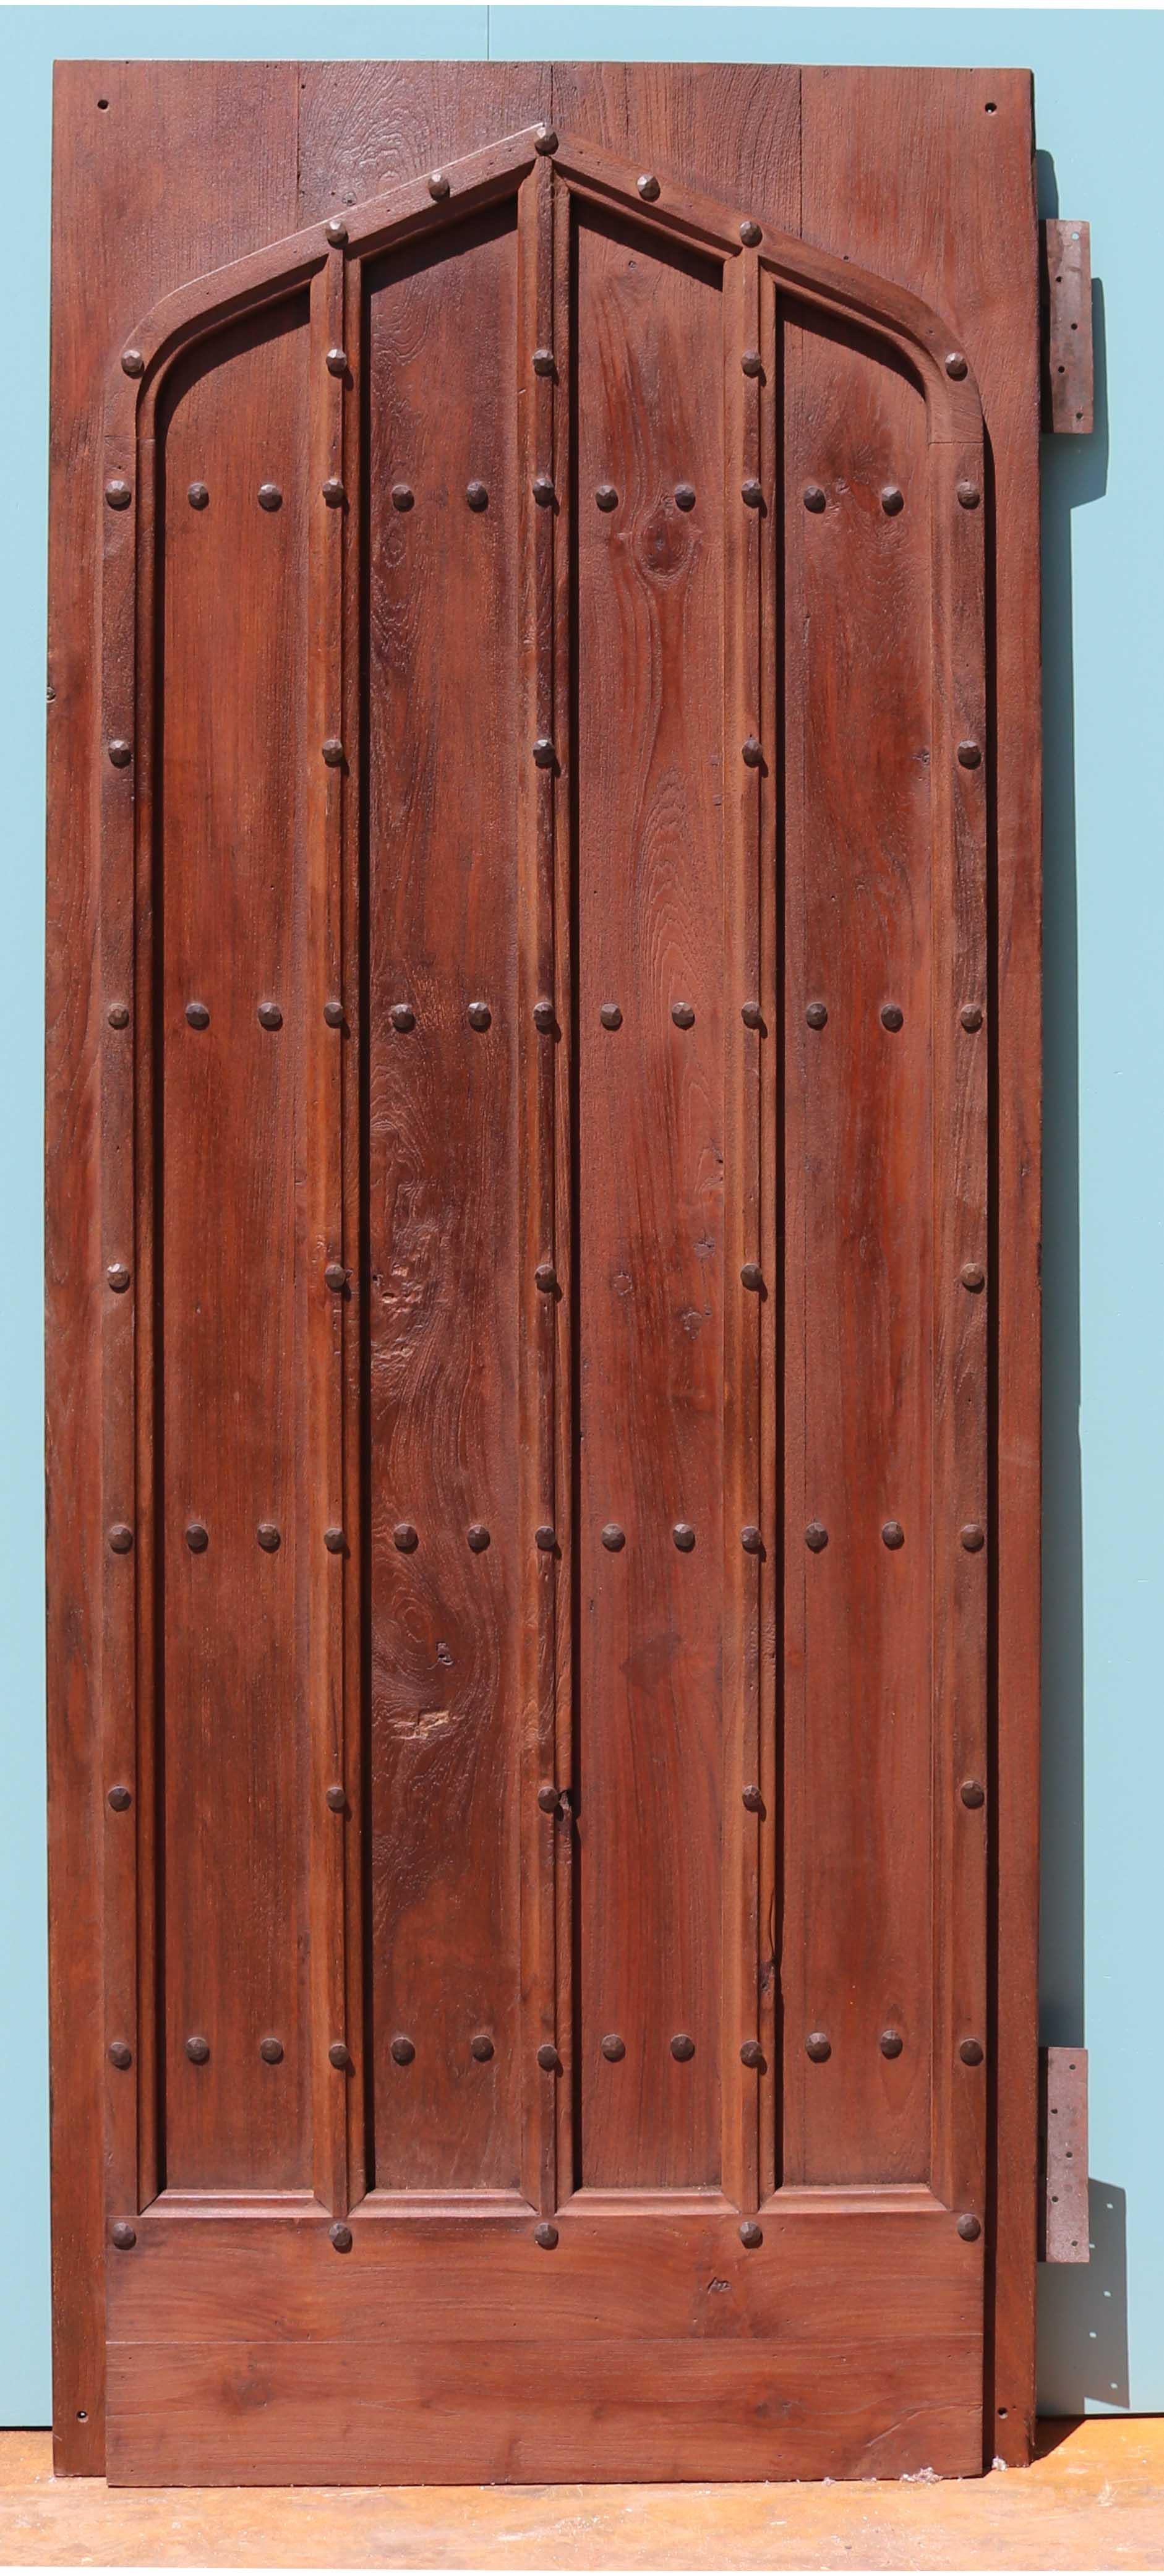 A good quality period style plank door with decorative moldings applied to the front.